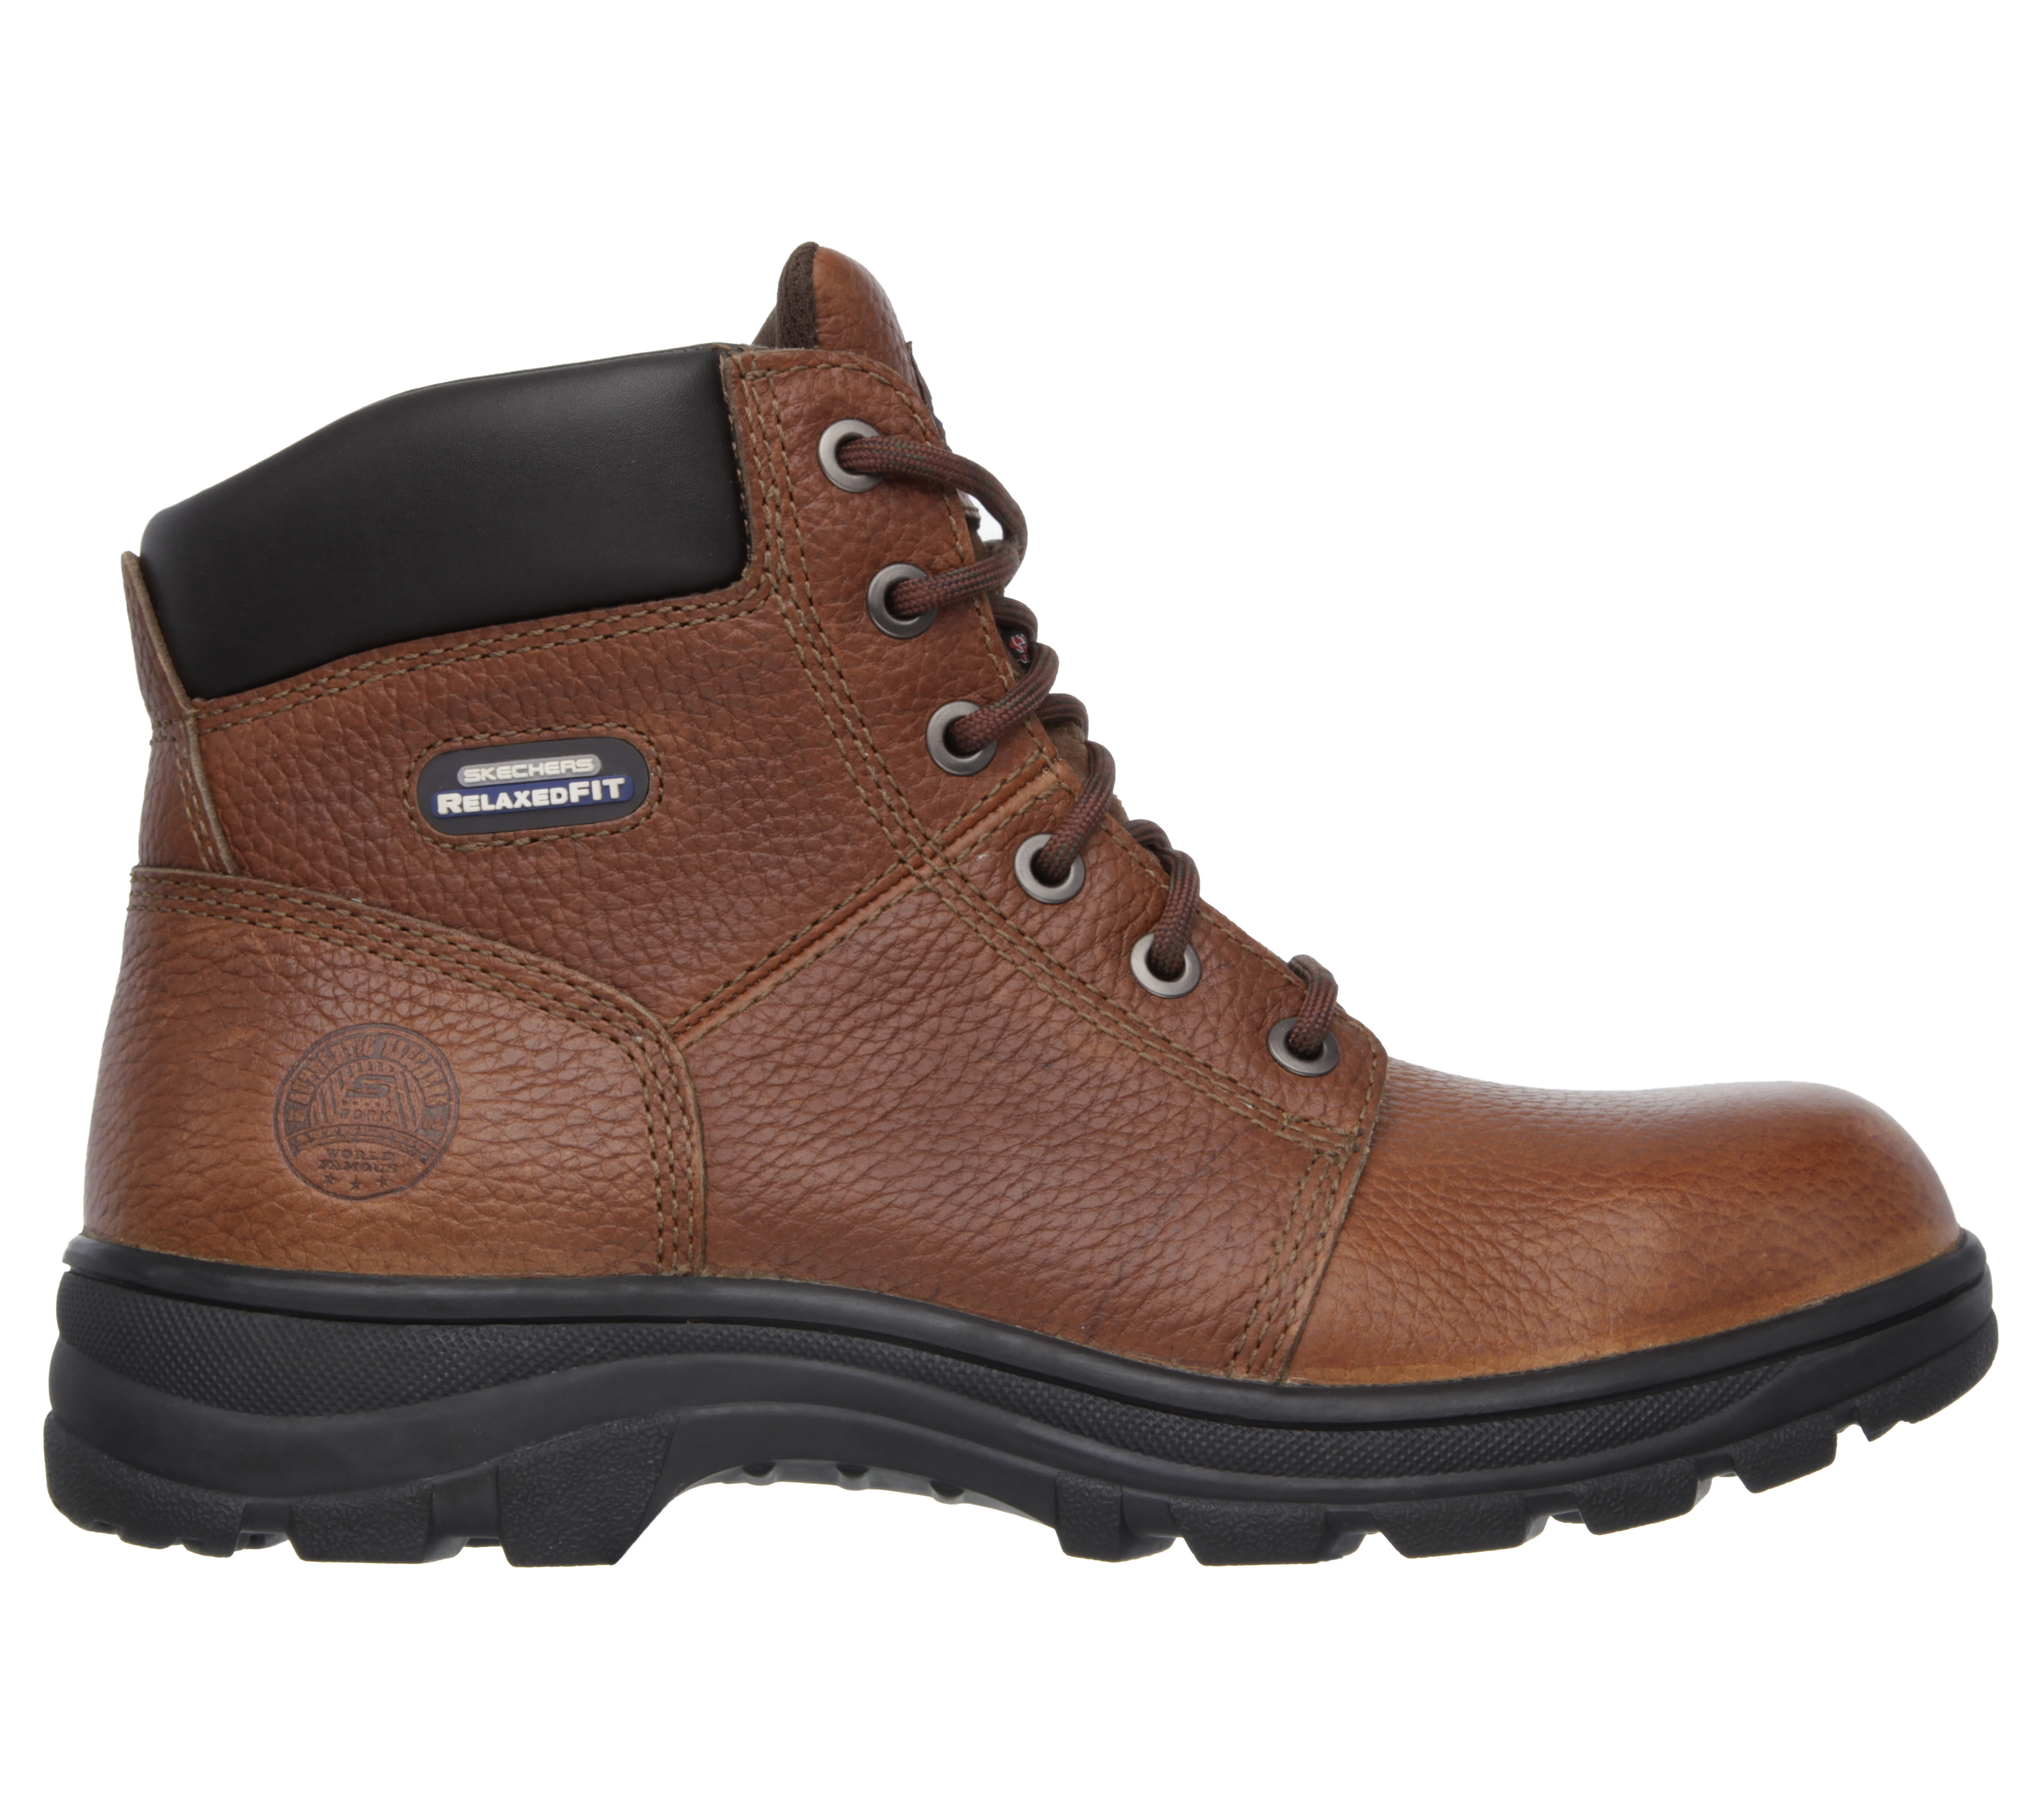 Match Steadily sweet Work: Relaxed Fit - Workshire ST | SKECHERS